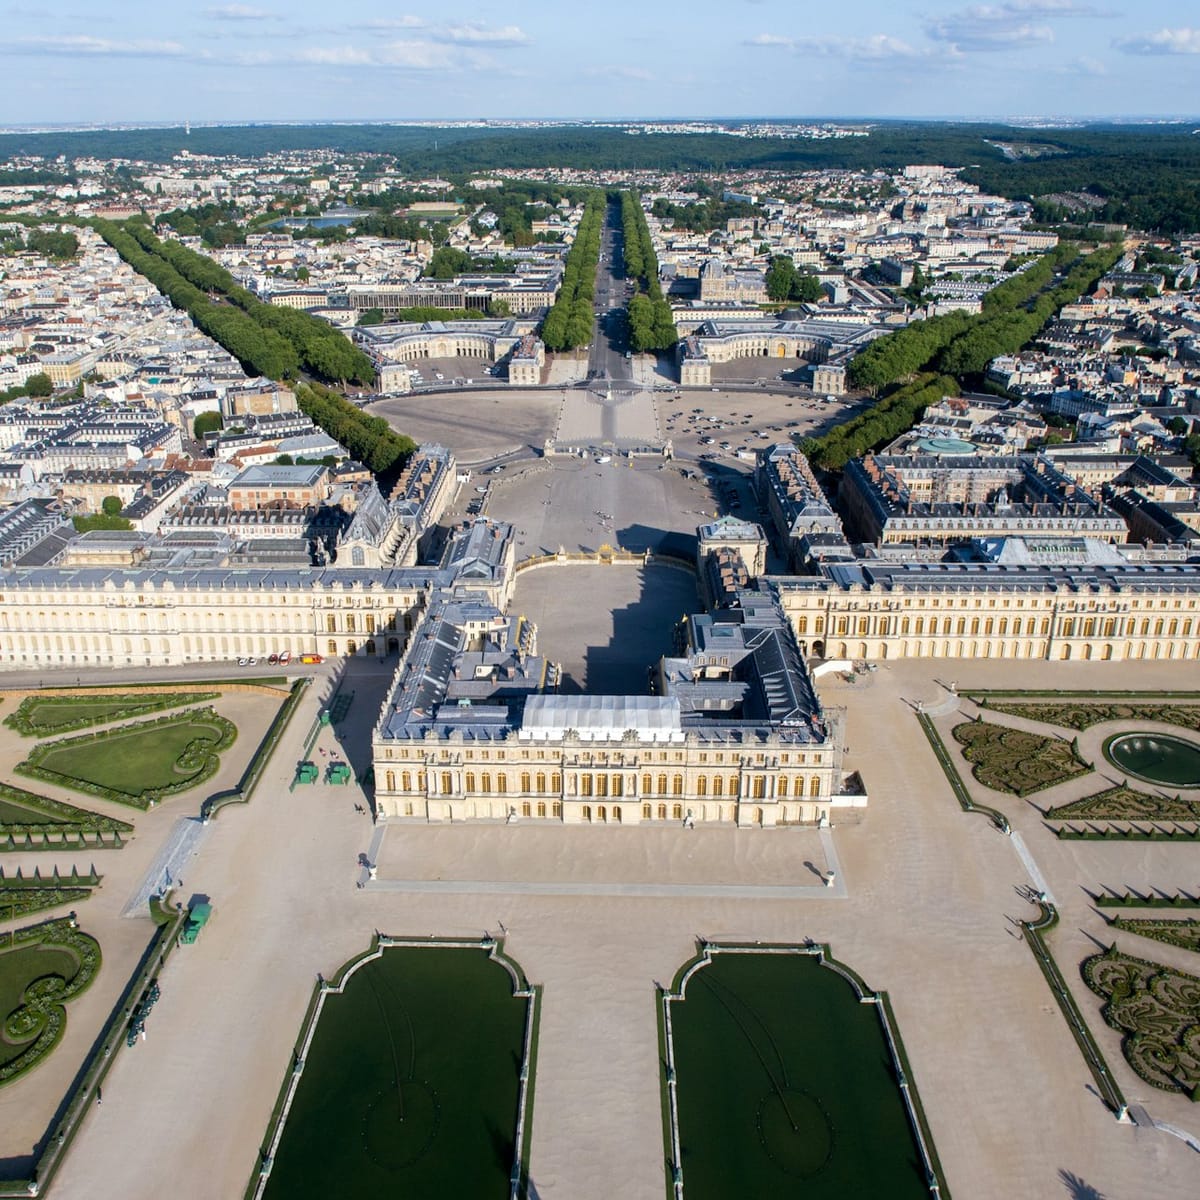 palace-of-versailles-entrance-ticket-gardens-estate-of-trianon_1